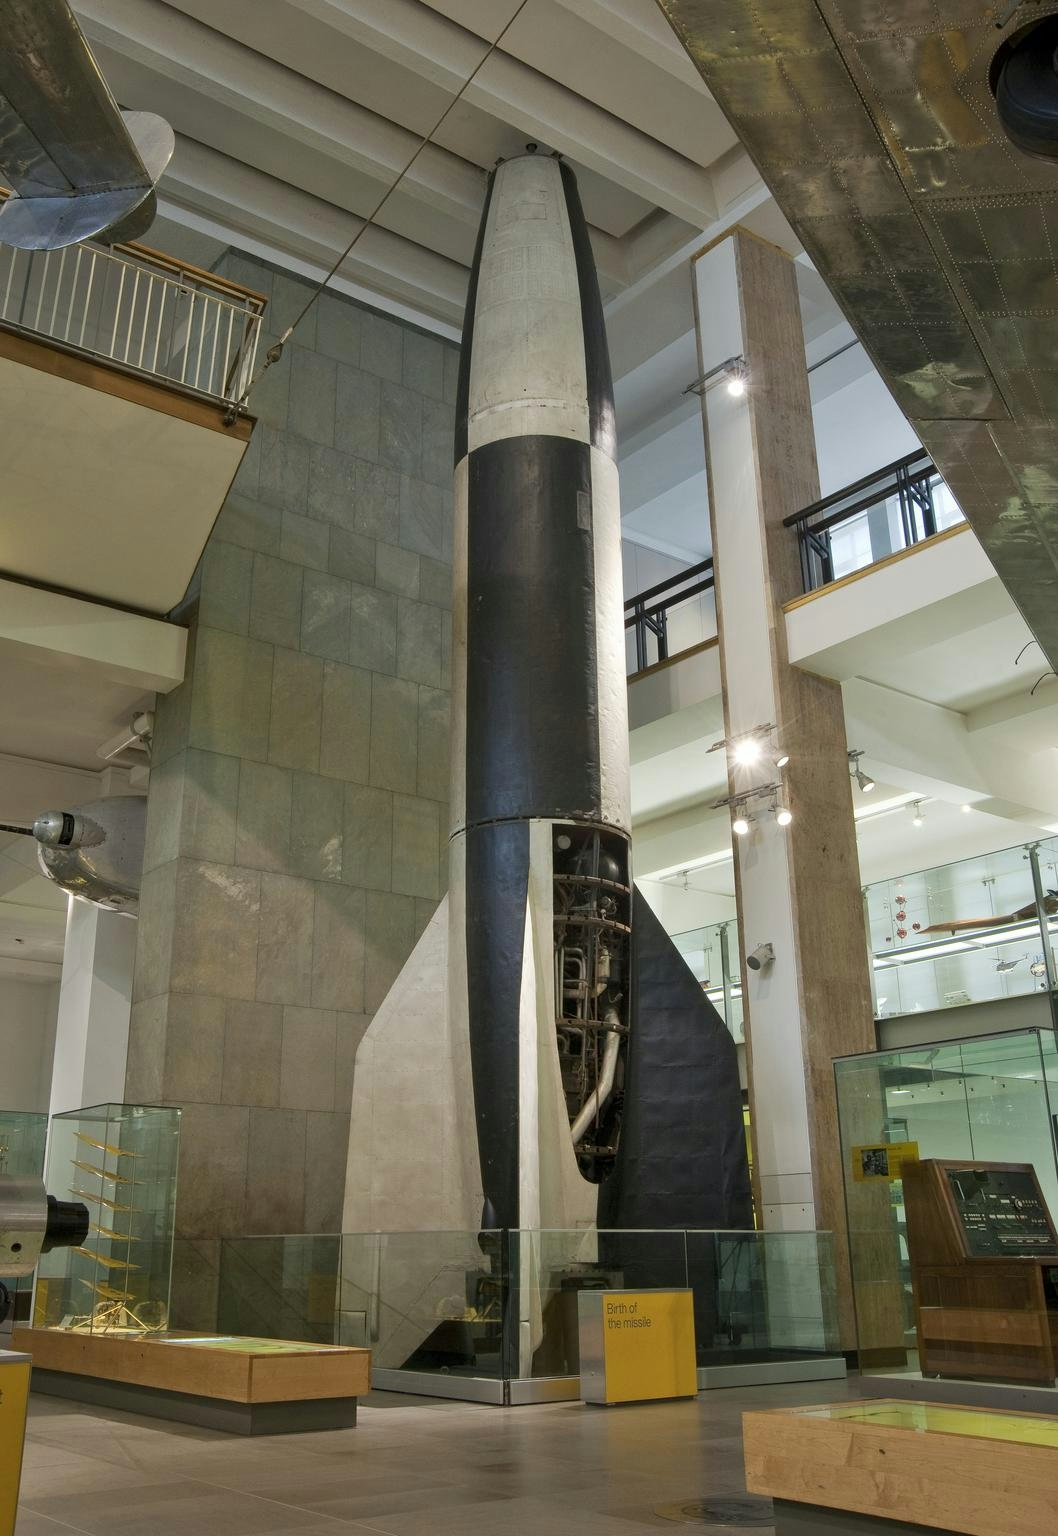 Colour photograph of a large black and white rocket, pictured on display inside a museum.